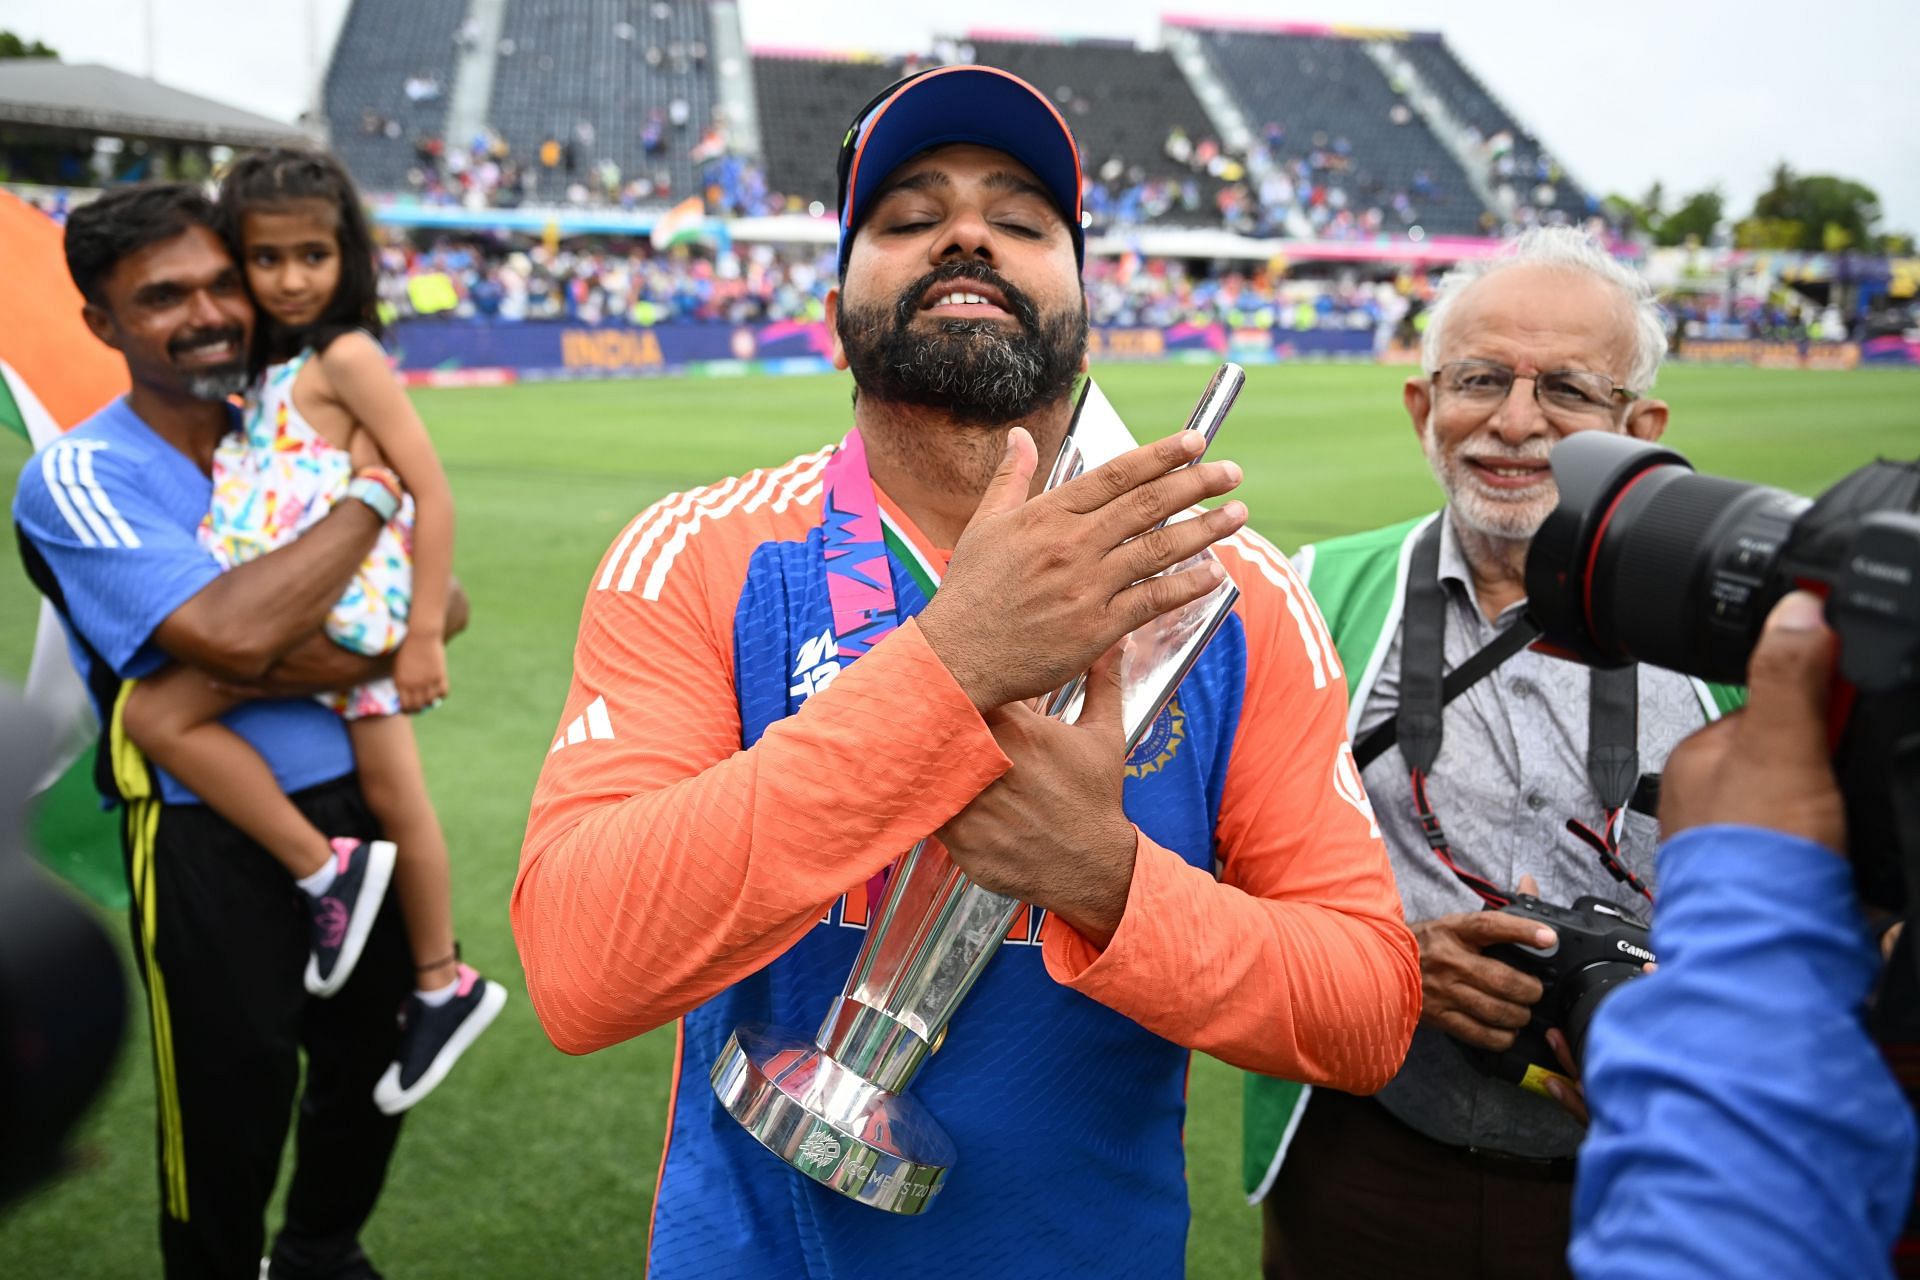 [Watch] Rohit Sharma takes extra care to shine the T20 World Cup trophy ahead of India's open-top bus parade